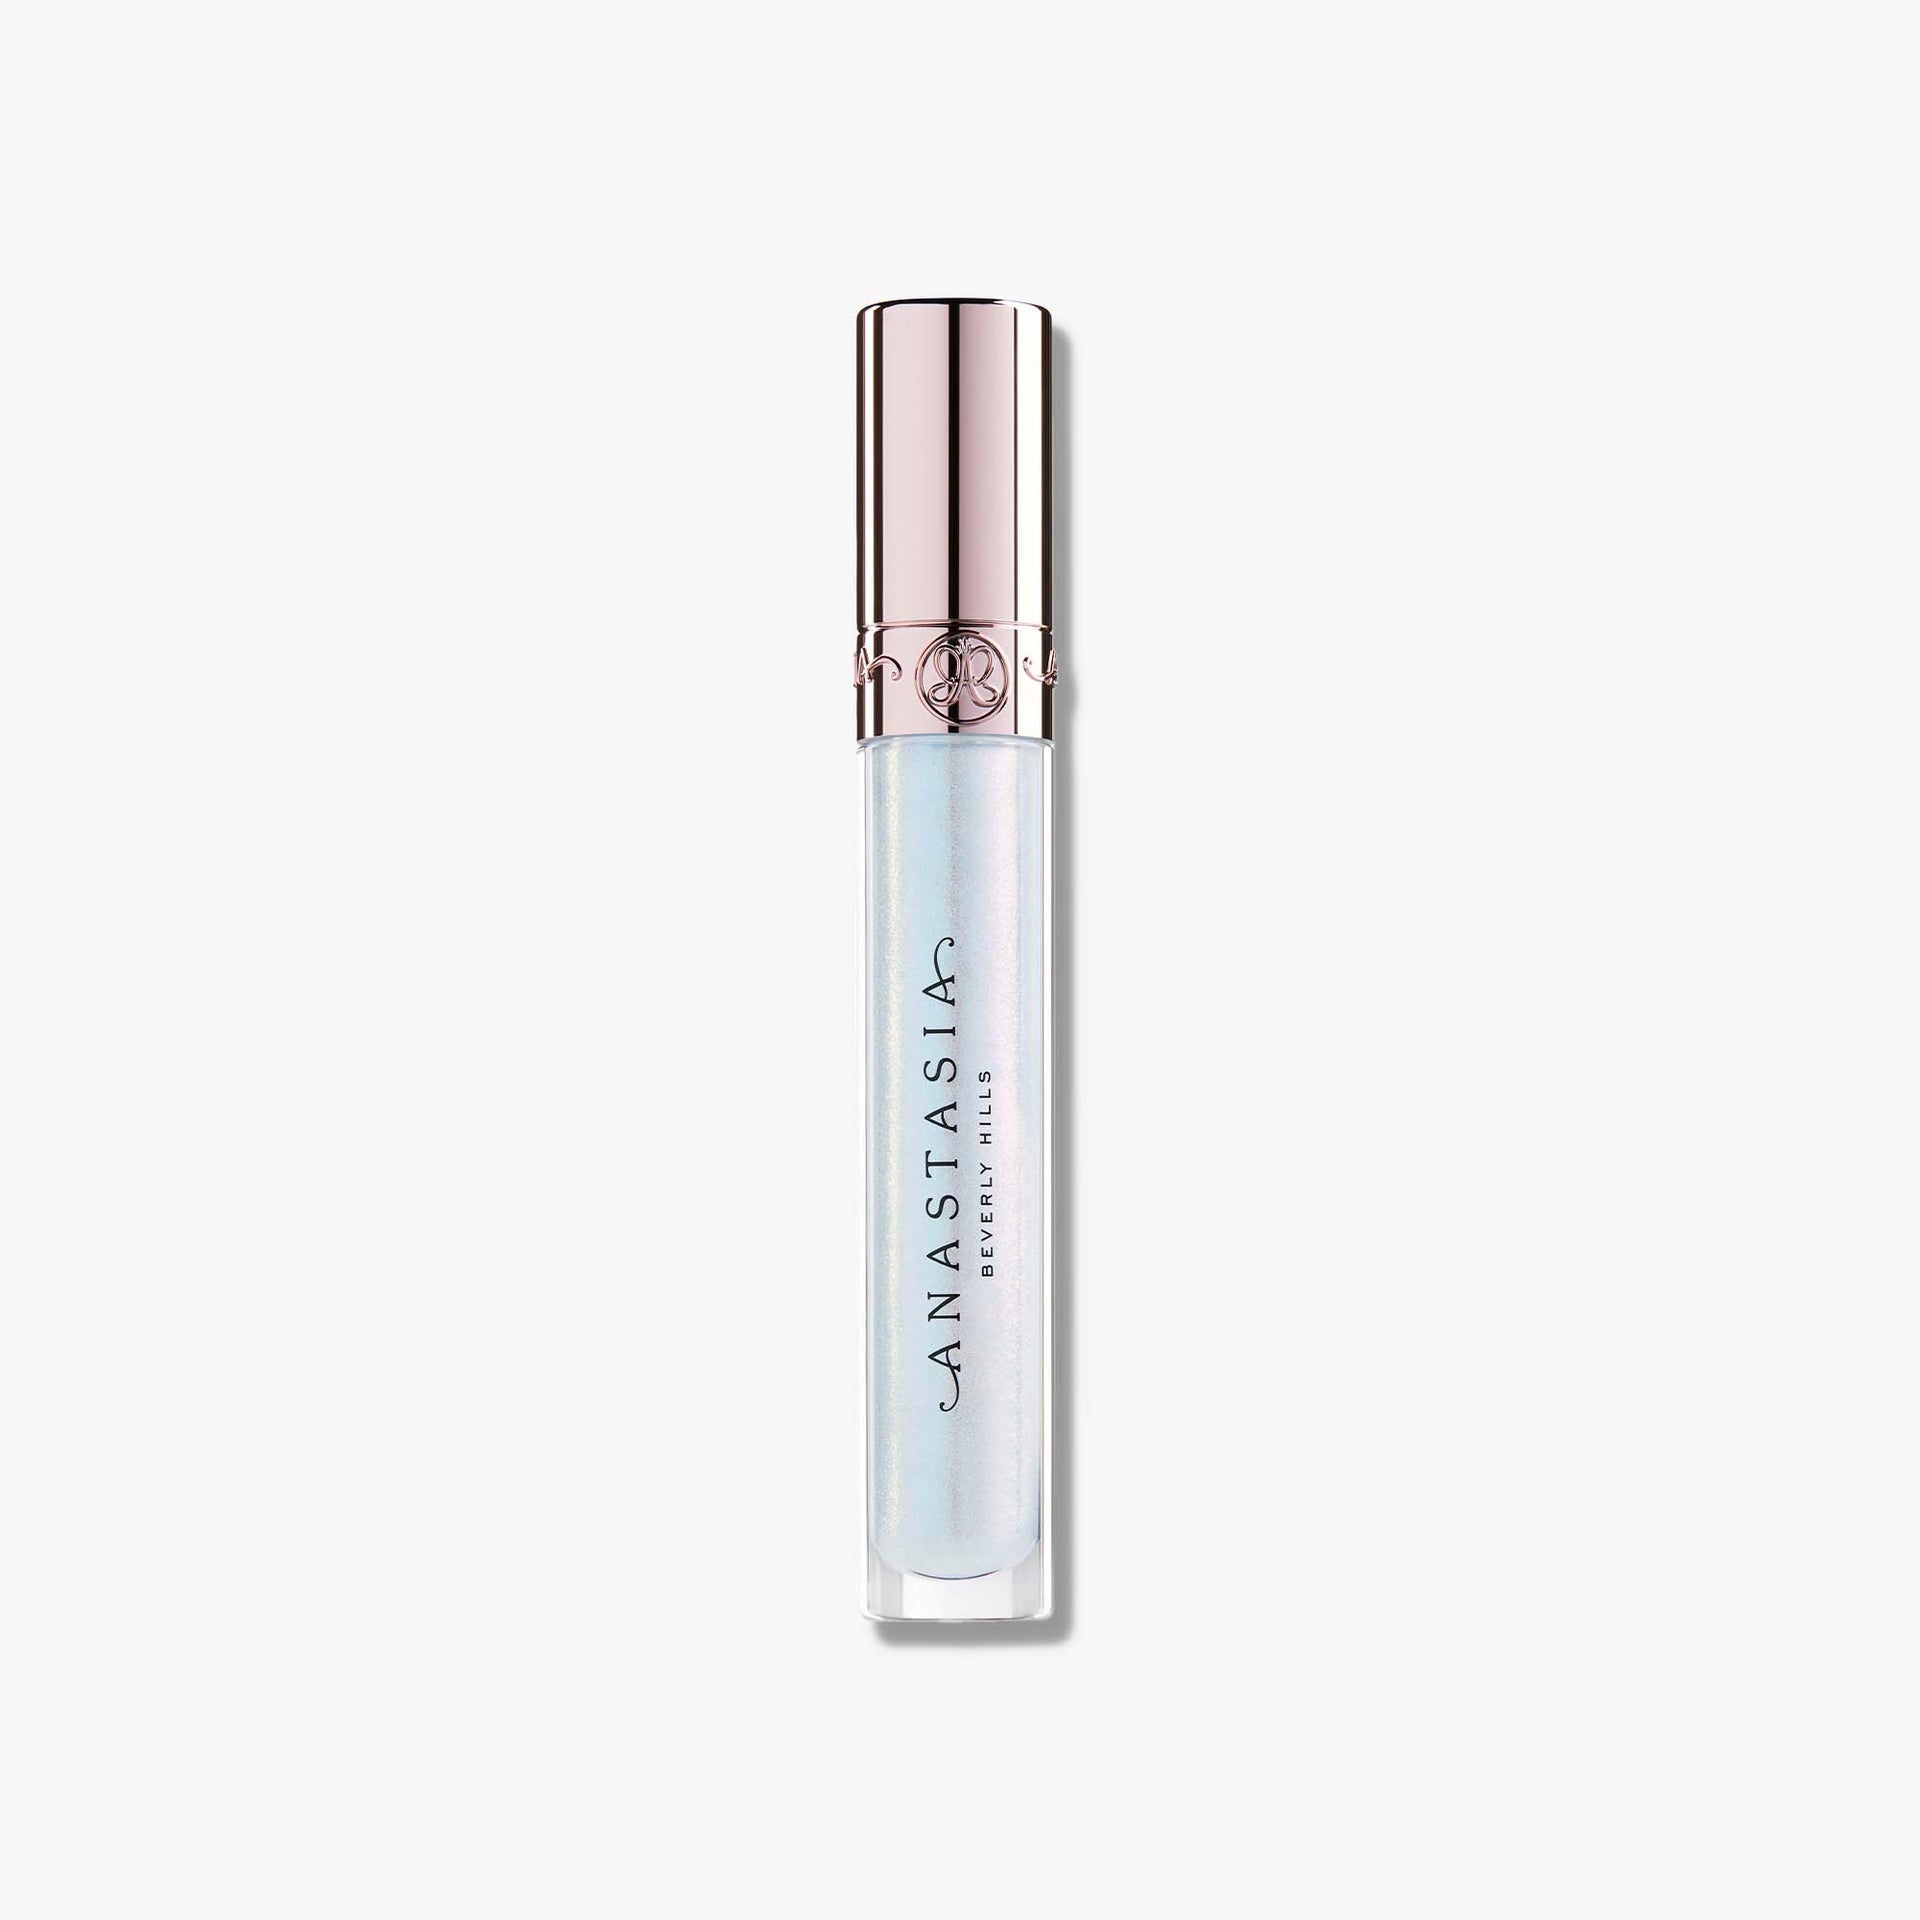 Supercluster | Cosmic Collection Lip Gloss - Supercluster